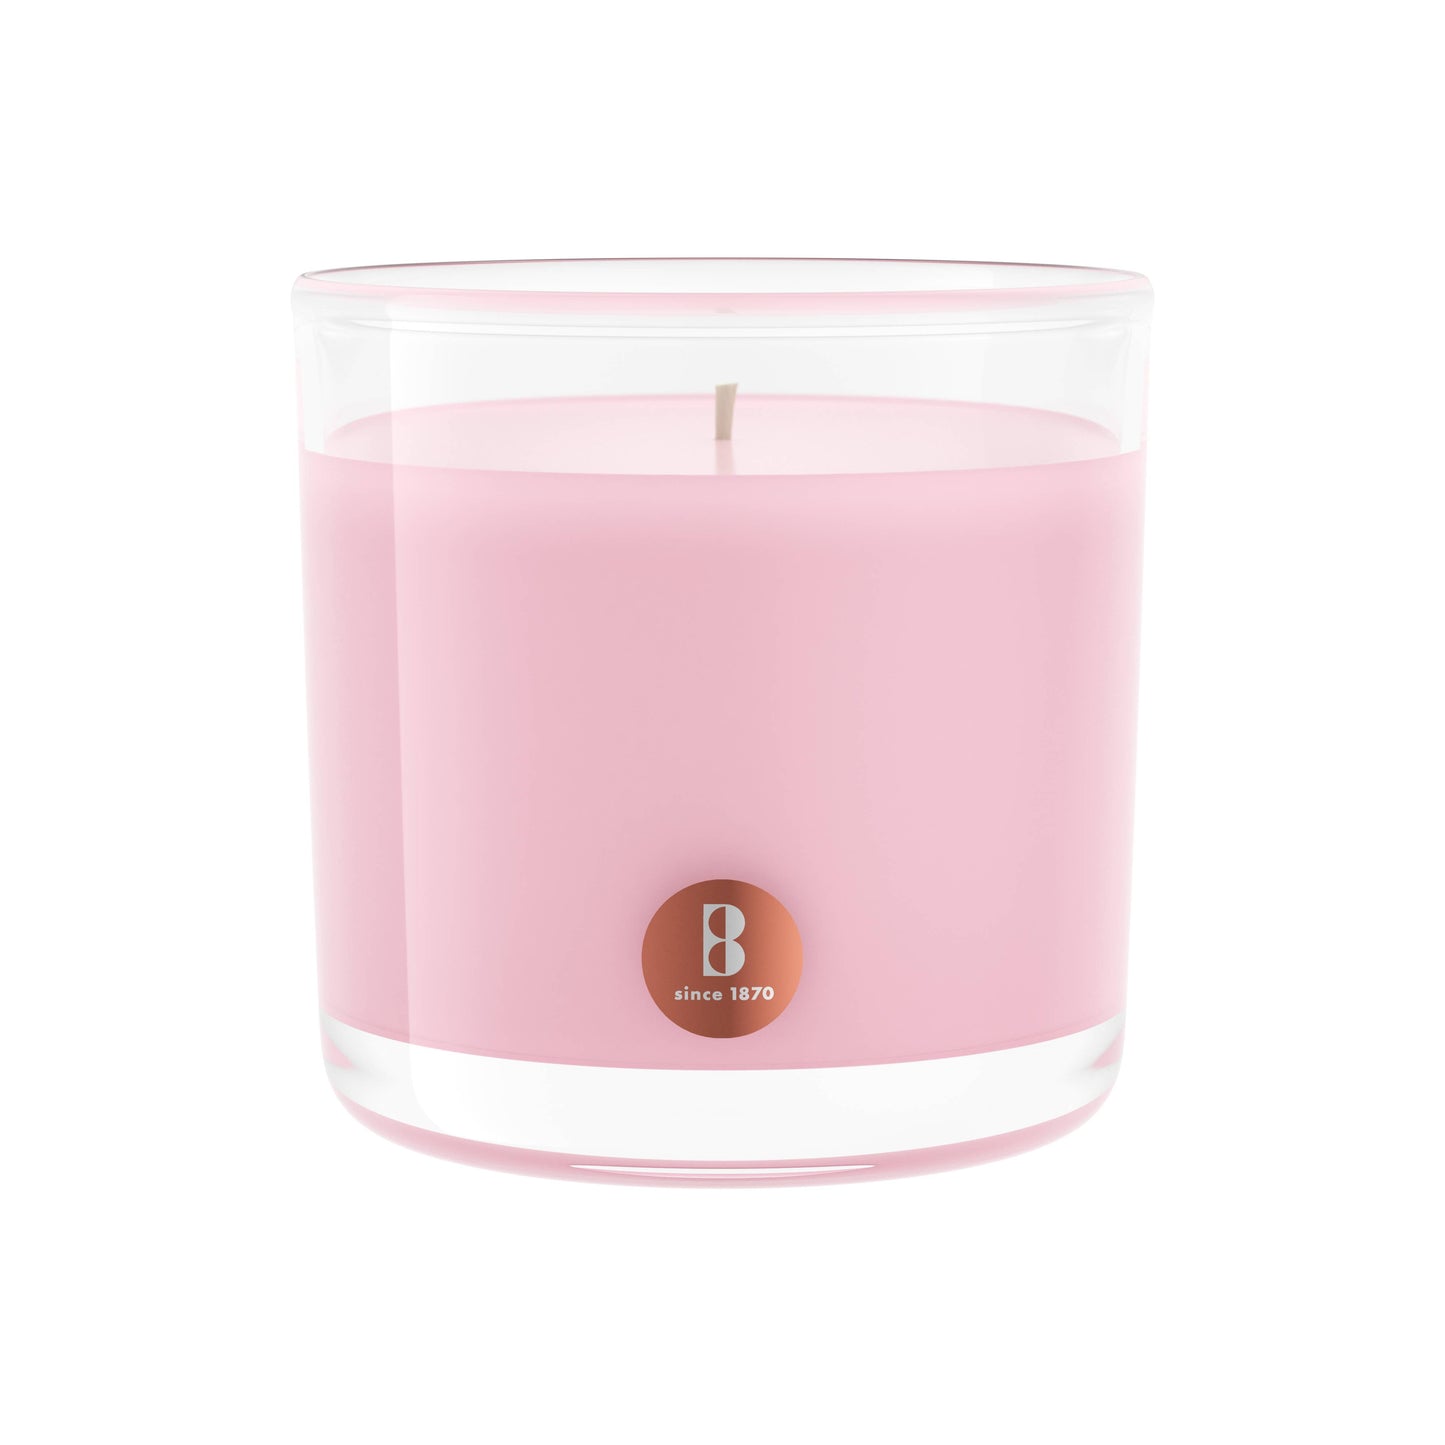 Magnolia Scented Candle - 3.75 x 3.75 Inches - 43